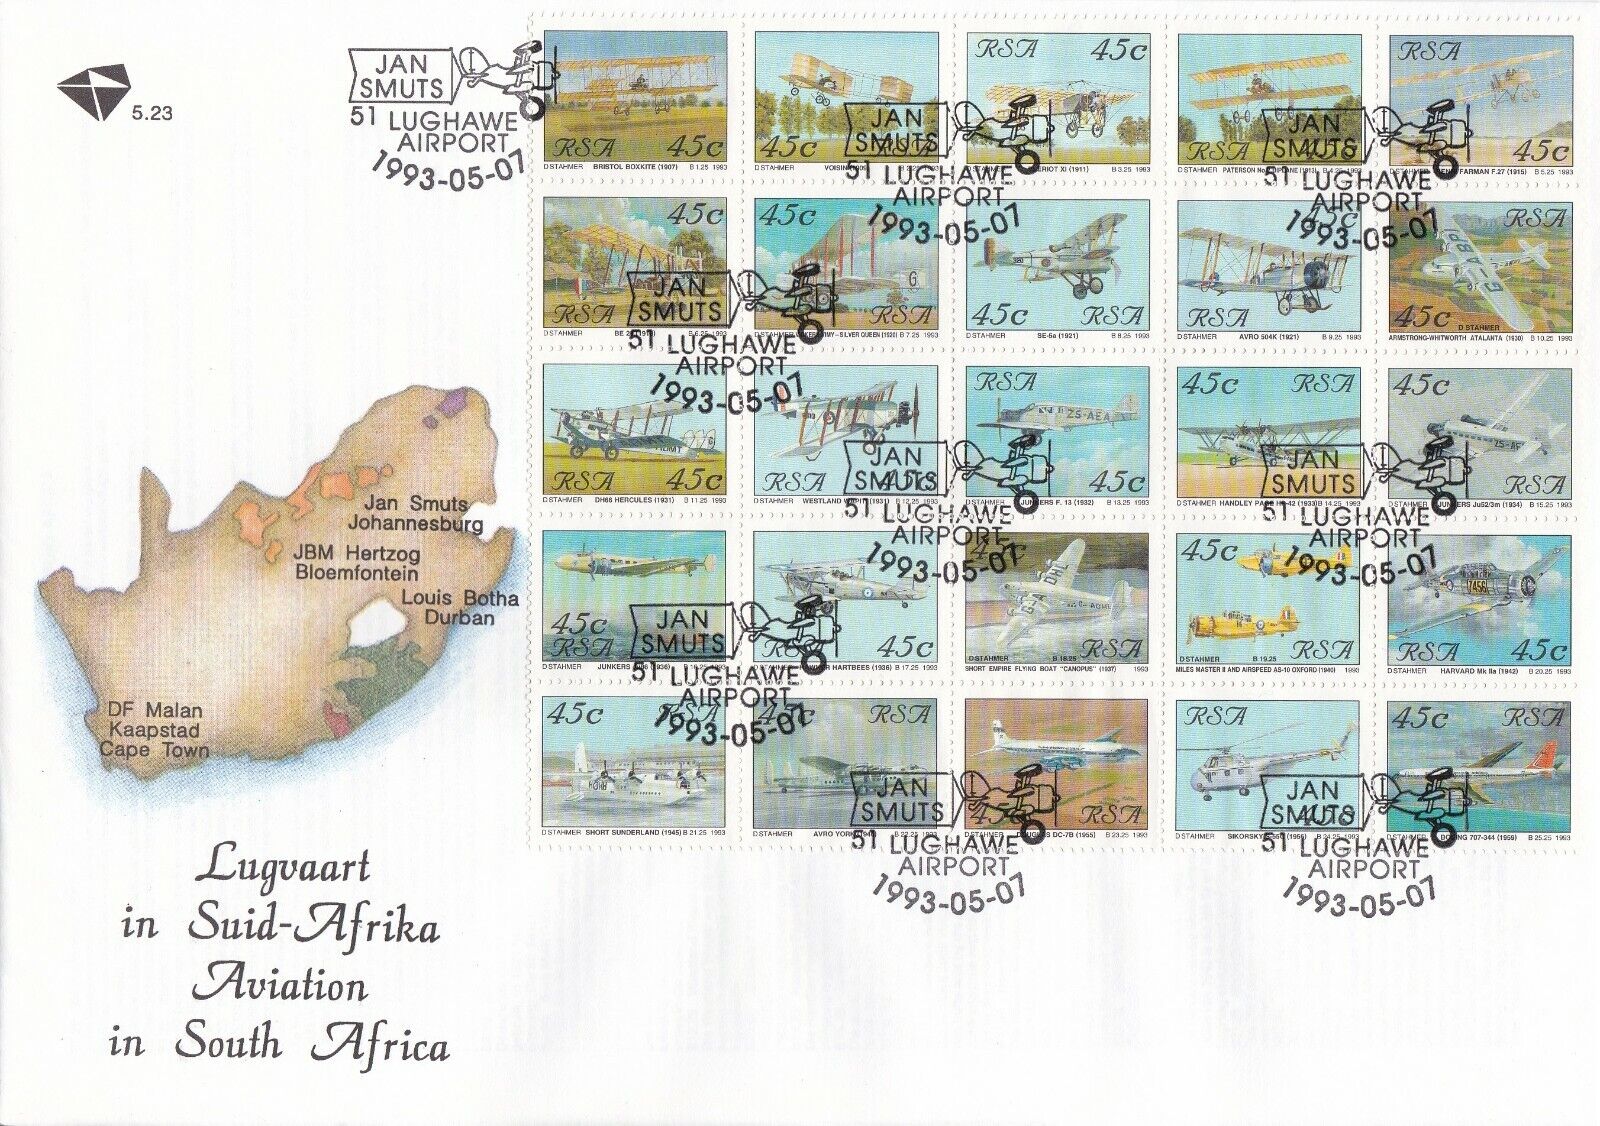 RSA3007 South Africa Commemorative FDC 1993 Cheap sale large in Aviation Financial sales sale